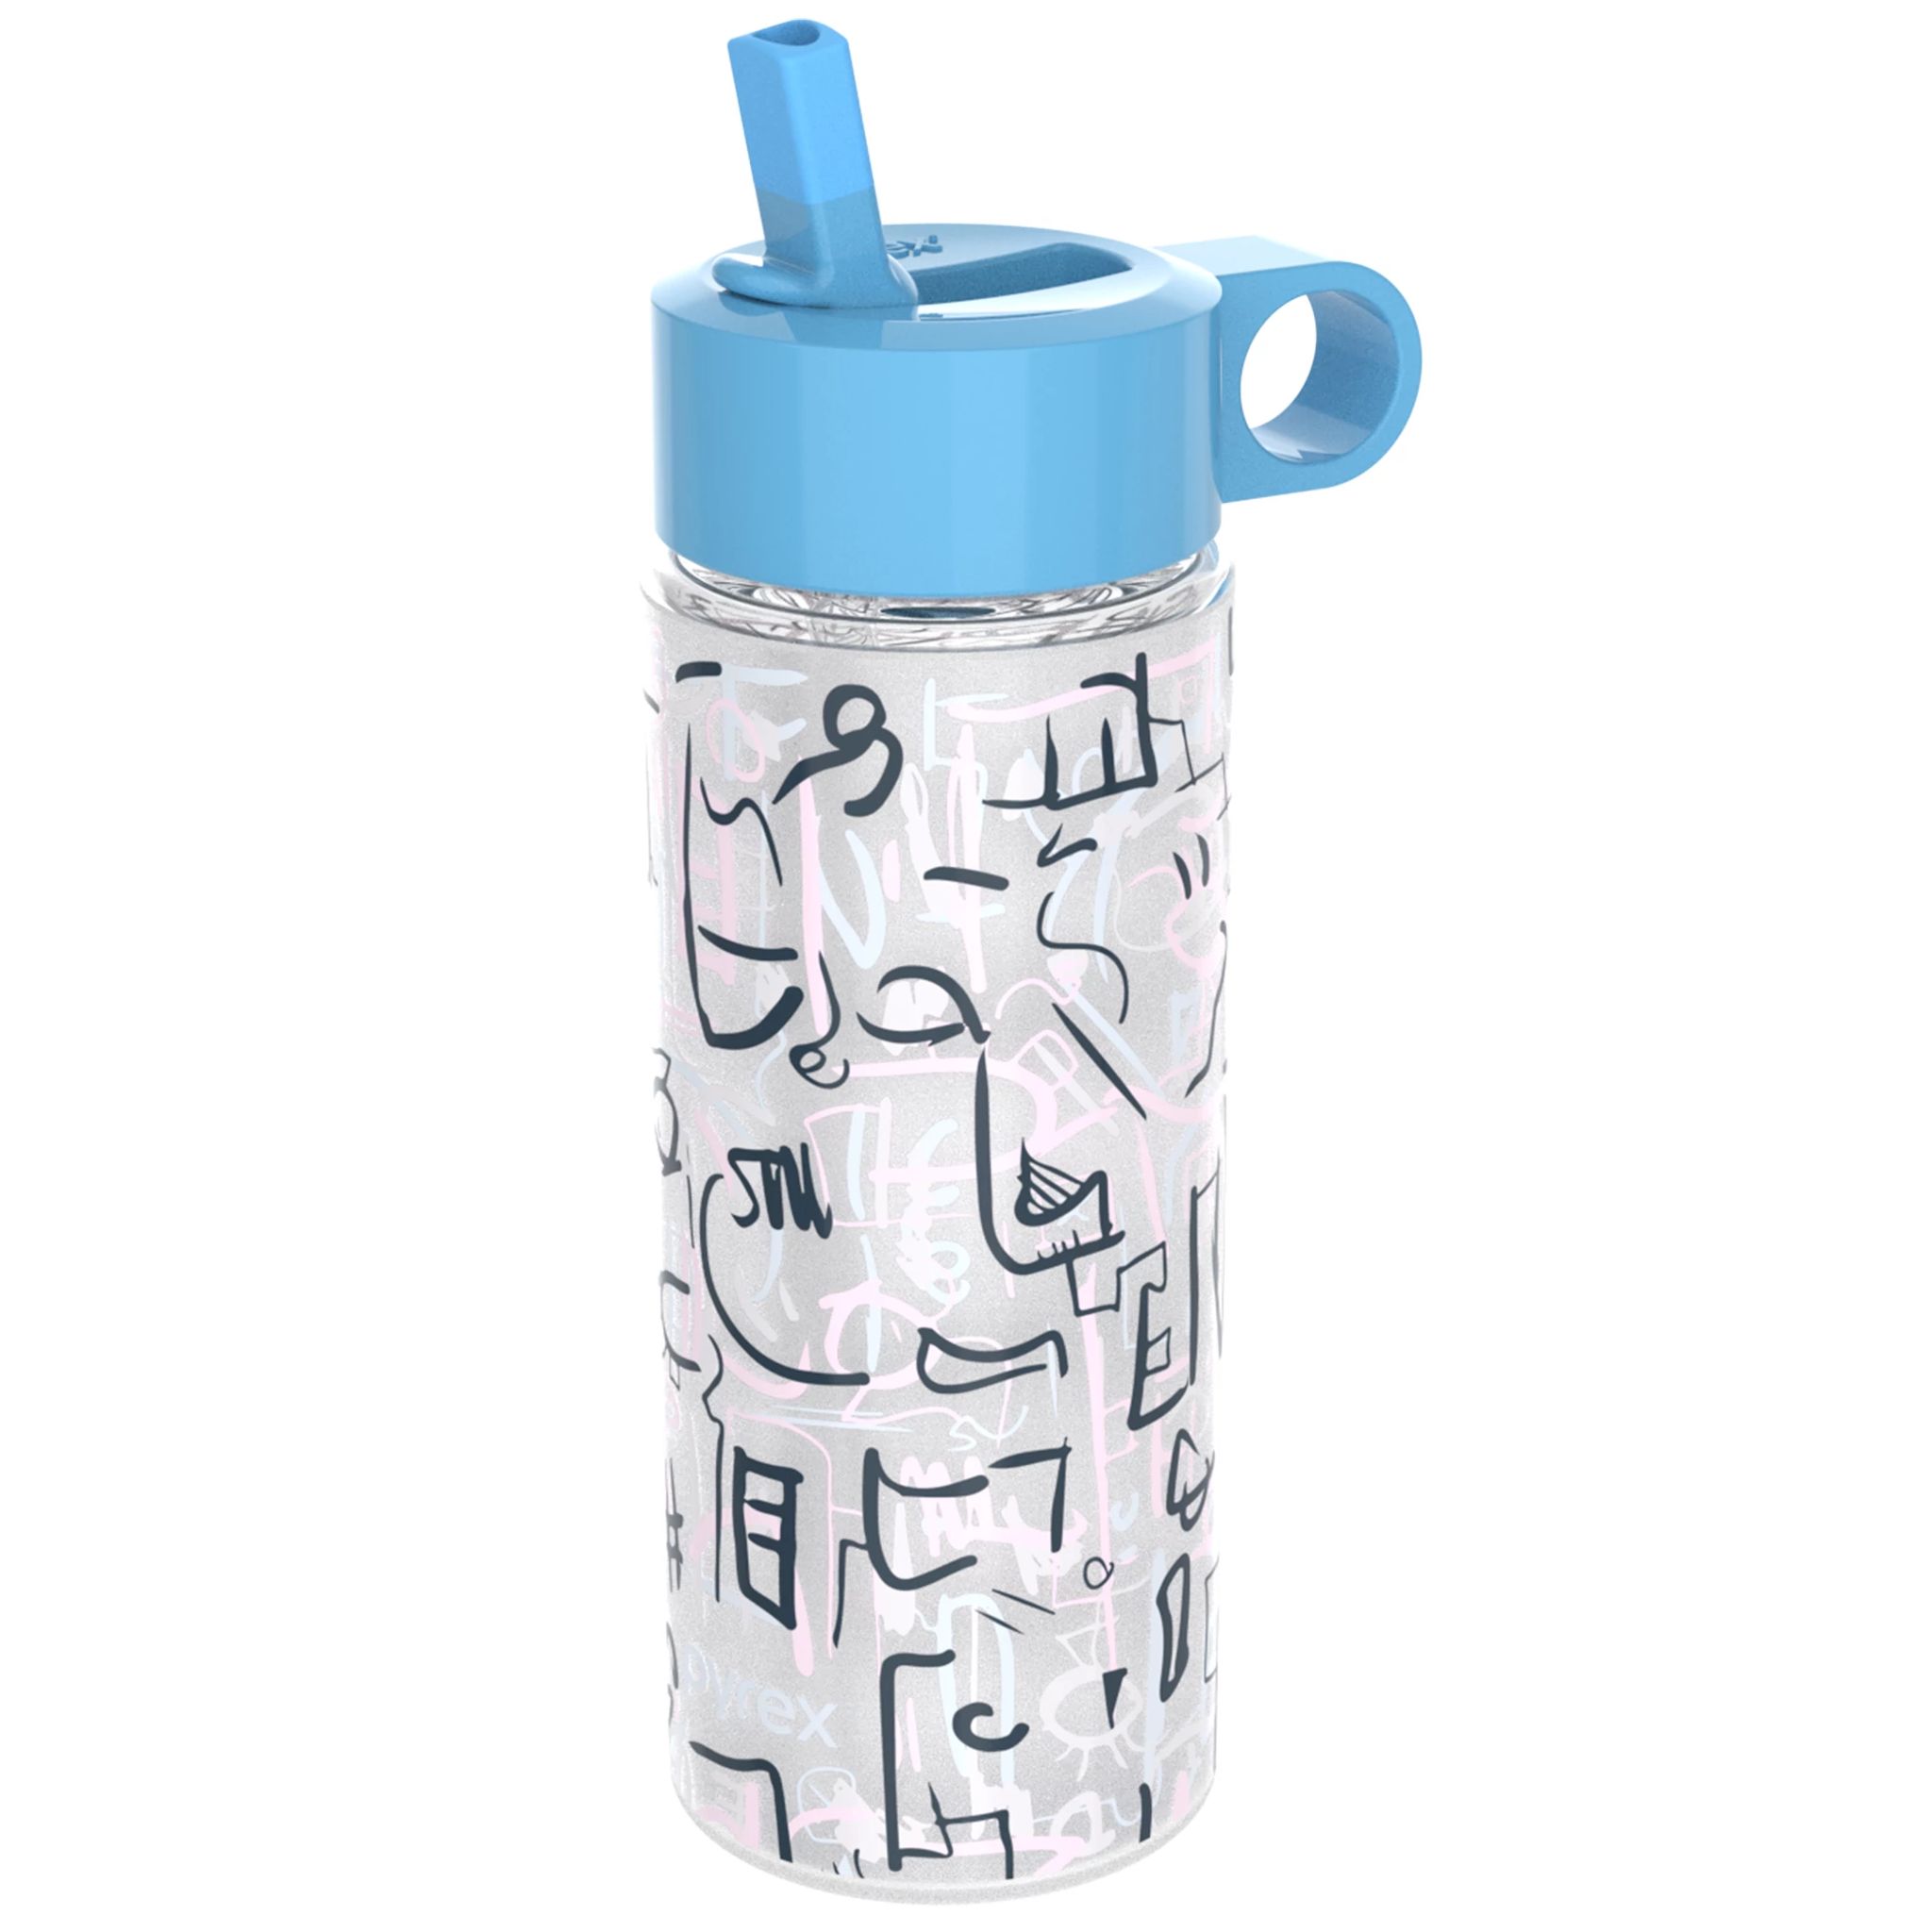 24-ounce Color Changing Glass Water Bottle with Silicone Coating: Doodles